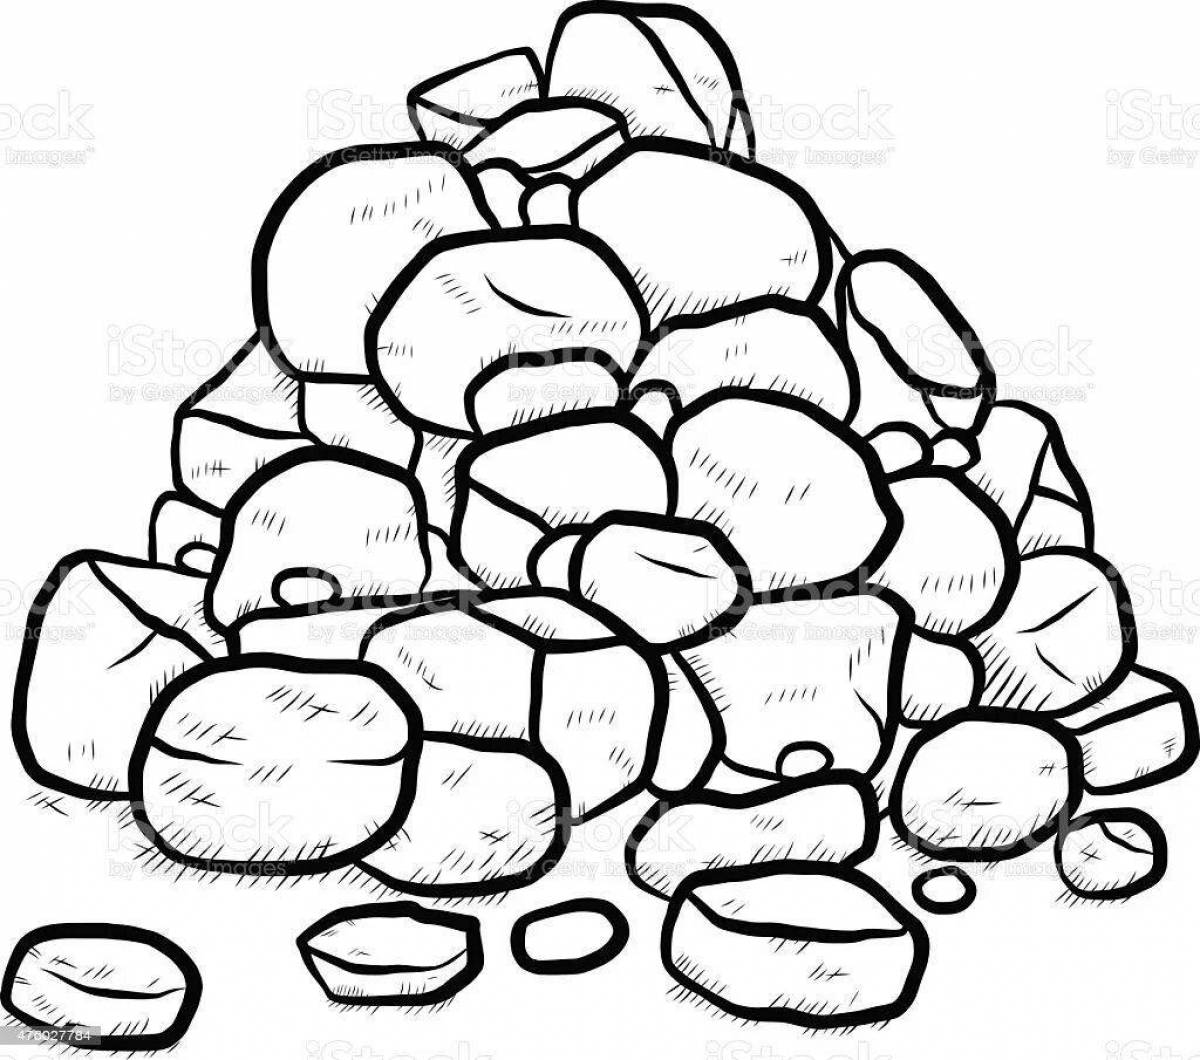 Great granite coloring page